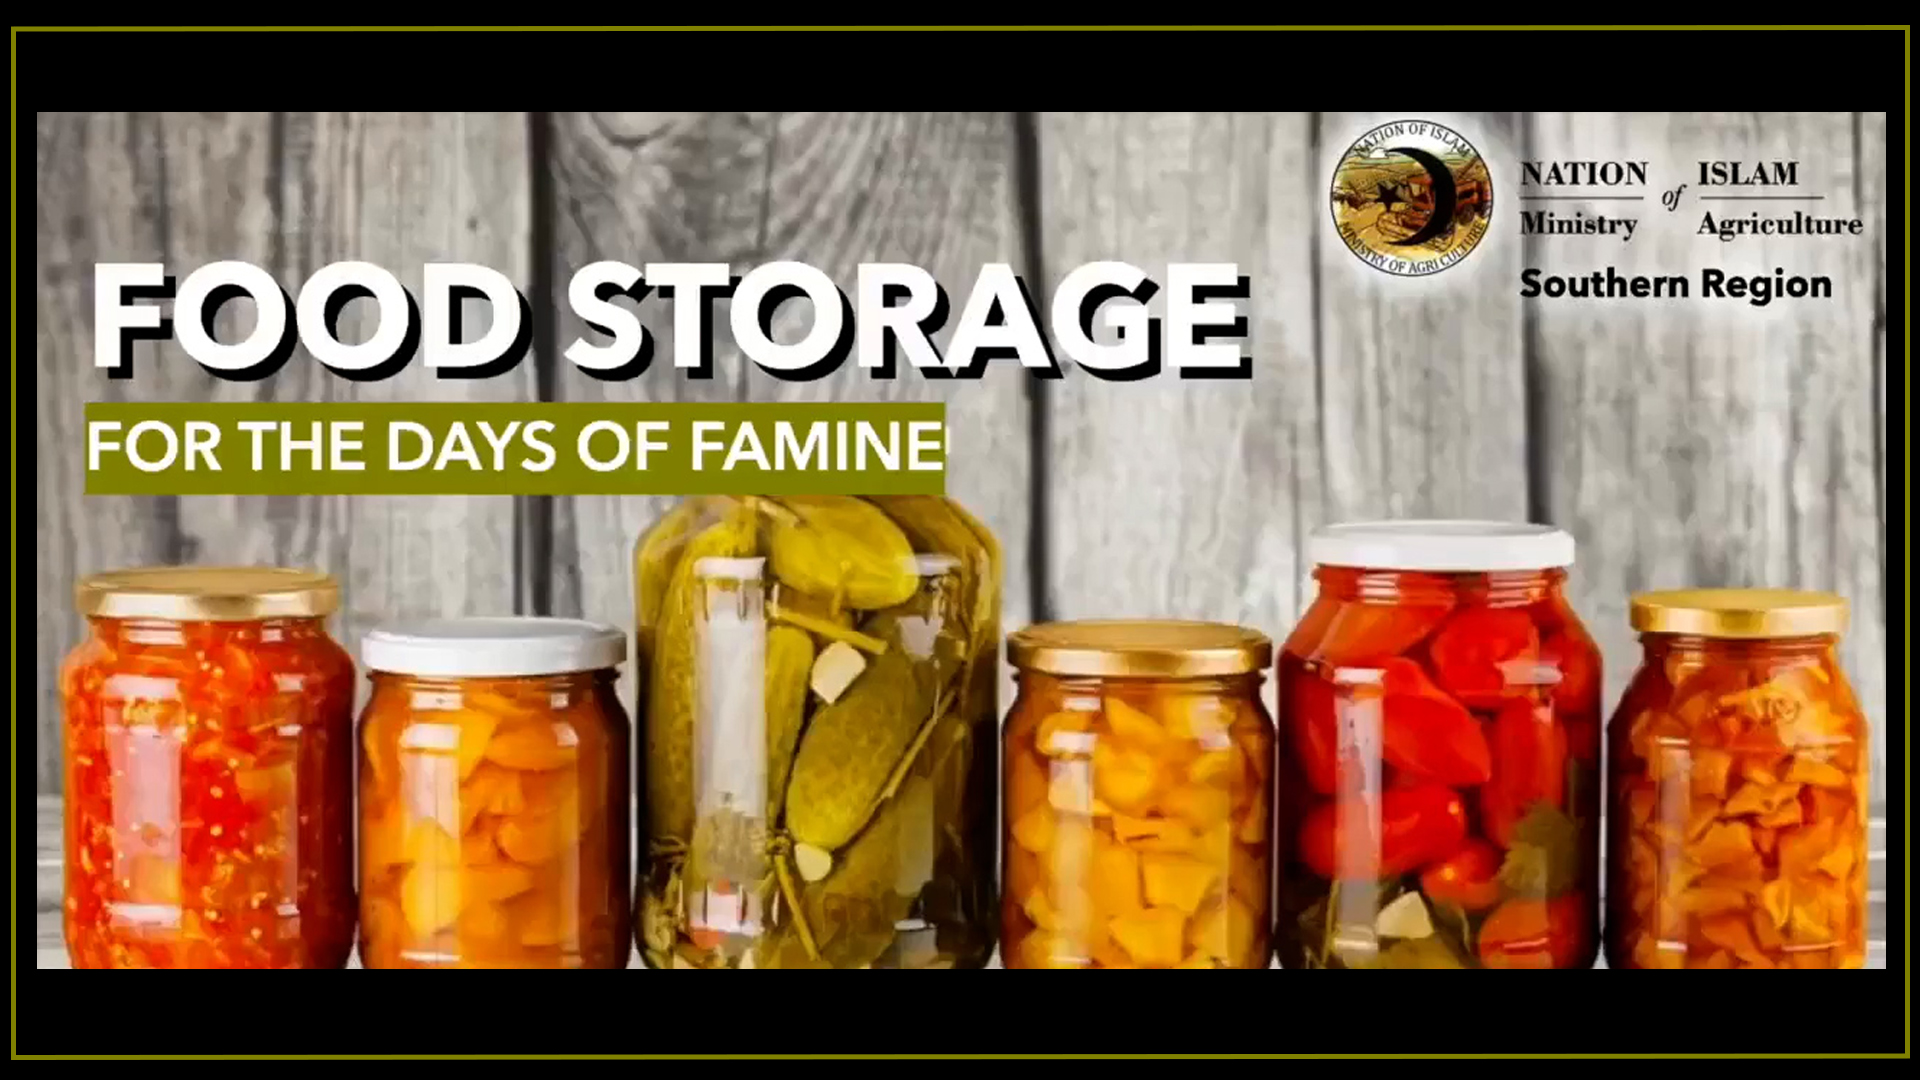 Food Storage Training For Days Of Famine